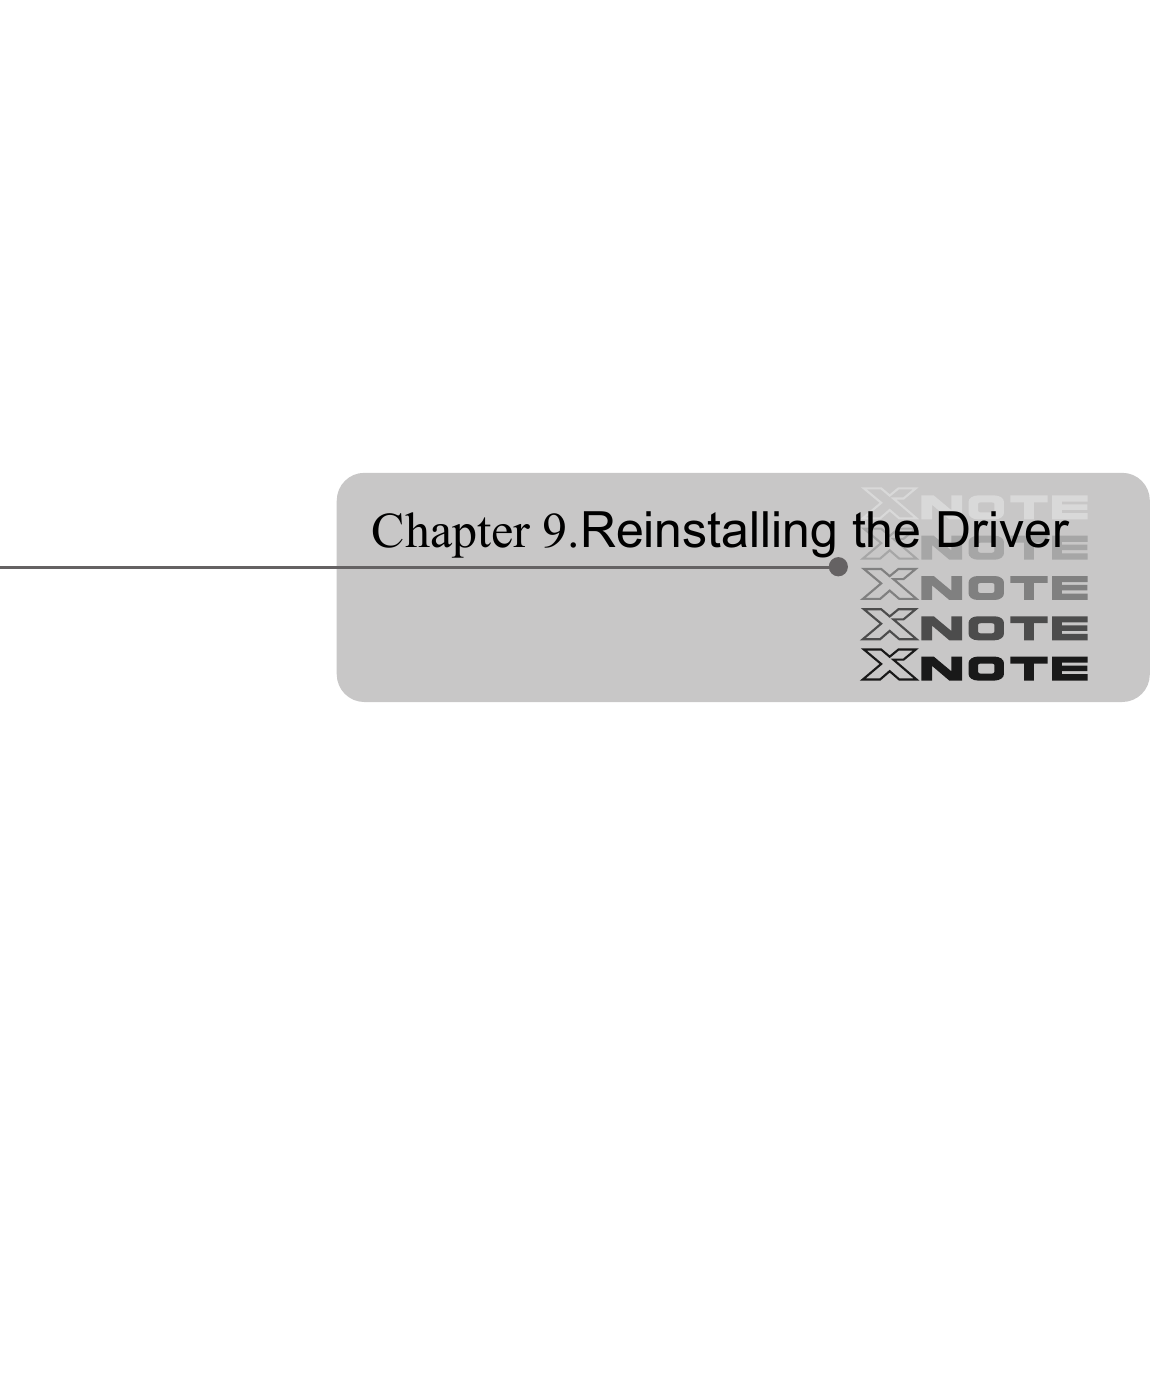  Chapter 9.Reinstalling the Driver